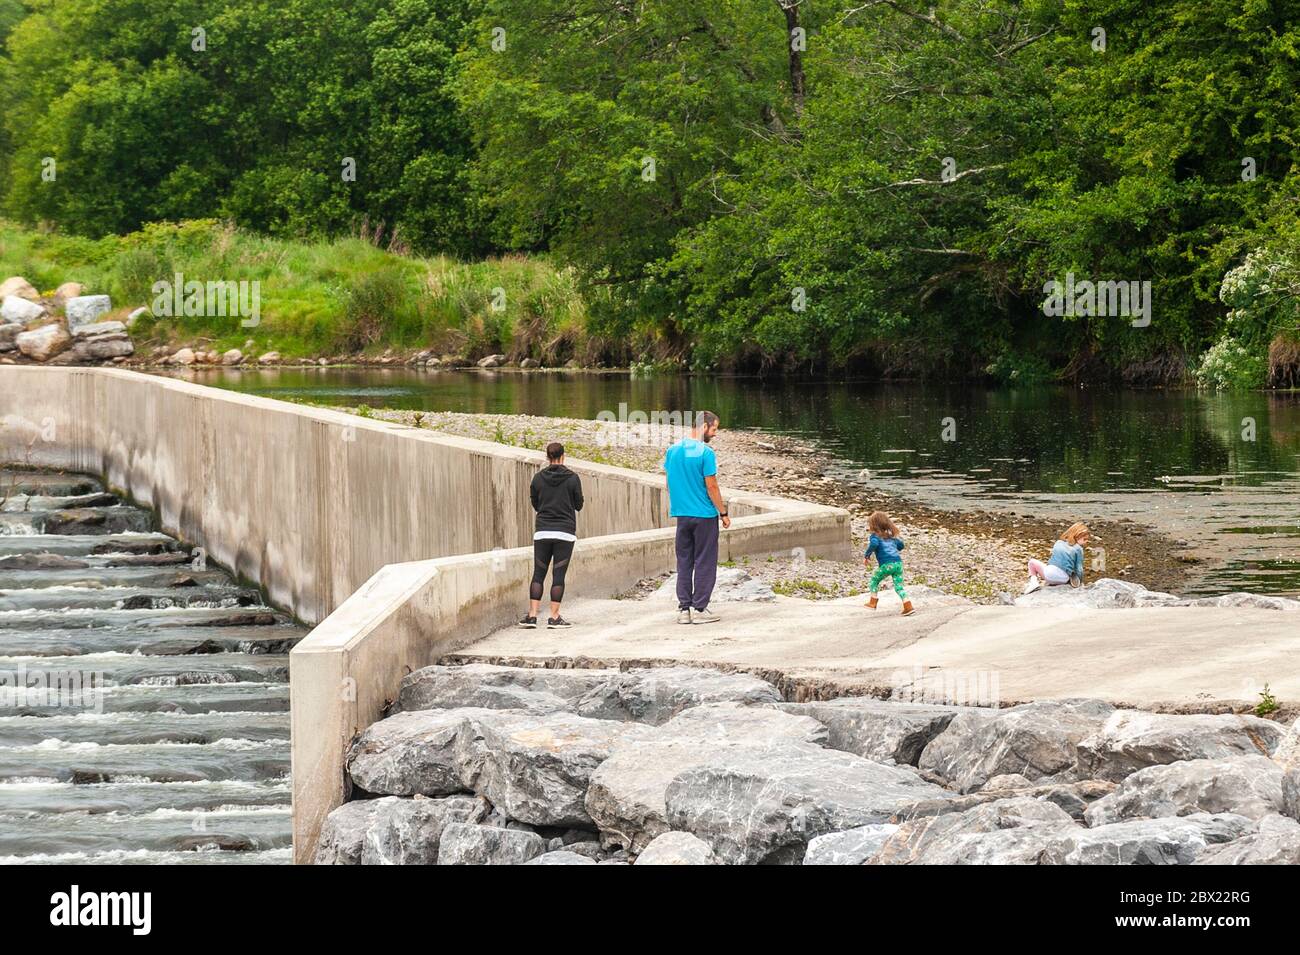 Bandon, West Cork, Ireland. 4th June, 2020. A family enjoys the warm weather in Bandon at the new weir. The water levels at the weir are significantly lower than usual due to the recent almost drought like weather conditions. Credit: AG News/Alamy Live News Stock Photo